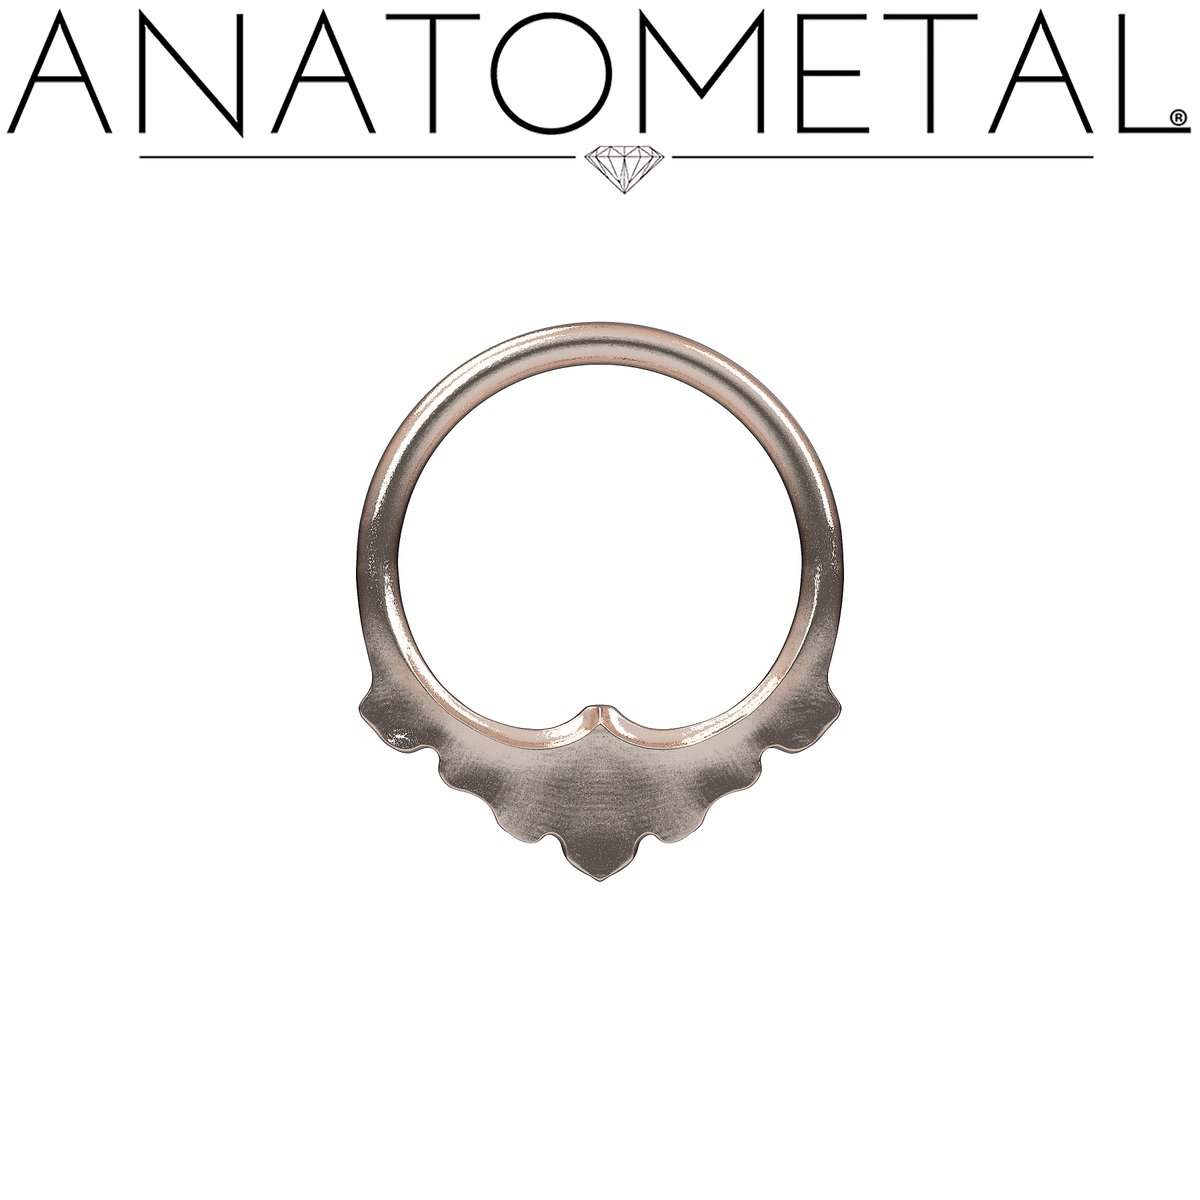 🌟 Elevate Your Style with Our Latest 18K Gold Seam Rings! Discover Seamless Elegance Now with our Hazel and Tafari designs✨

#anatometal #jewelry #GOLD #18K #piercing #bodypiercing #safepiercing #madeinsantacruz